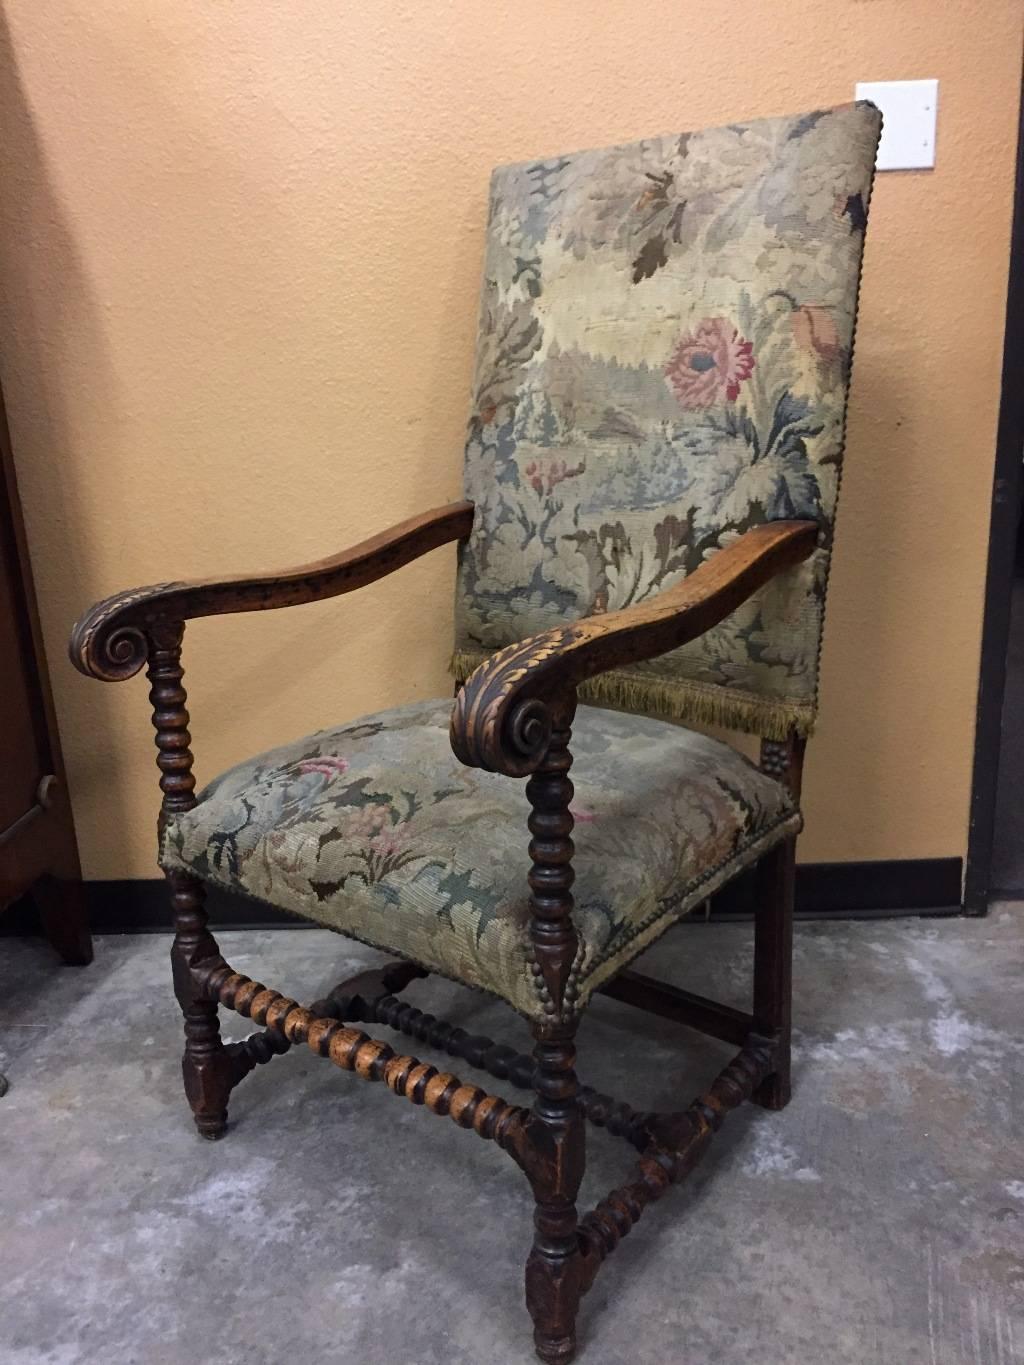 Magnificent 19th century Louis XIII style carved walnut armchair with scenic tapestry upholstery and acanthus leaf motif arms, terminating in turned legs conjoined by turned stretcher. 
The upholstery is a 19th century handmade Flemish tapestry.